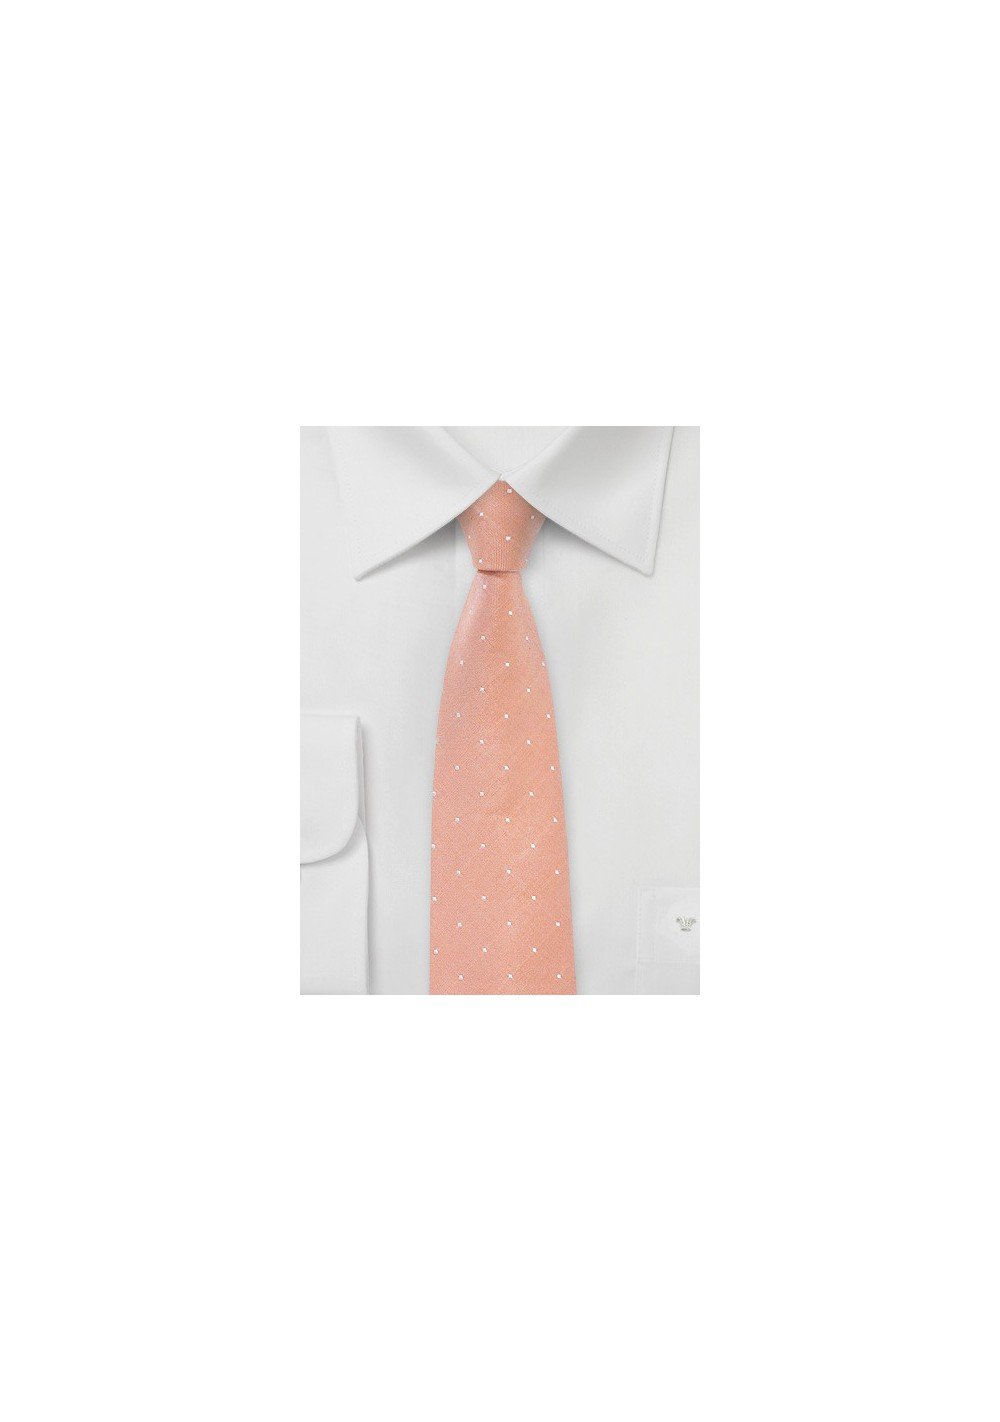 Dotted Tie in Peach Coral